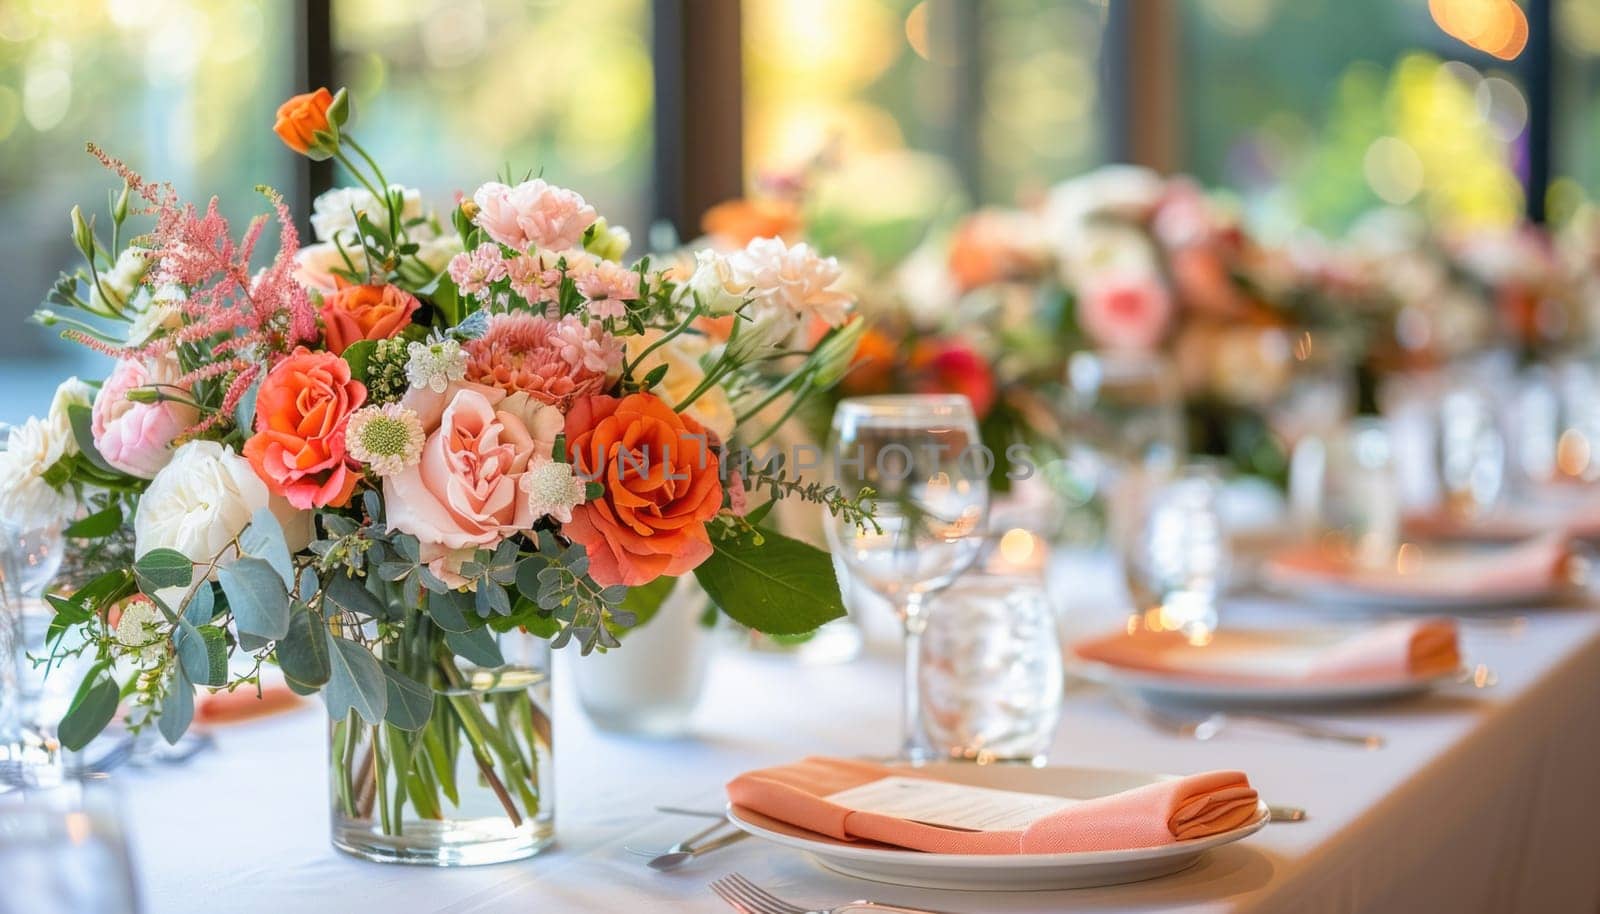 A beautifully arranged table for a wedding reception with plates, glasses, and vases filled with flowers